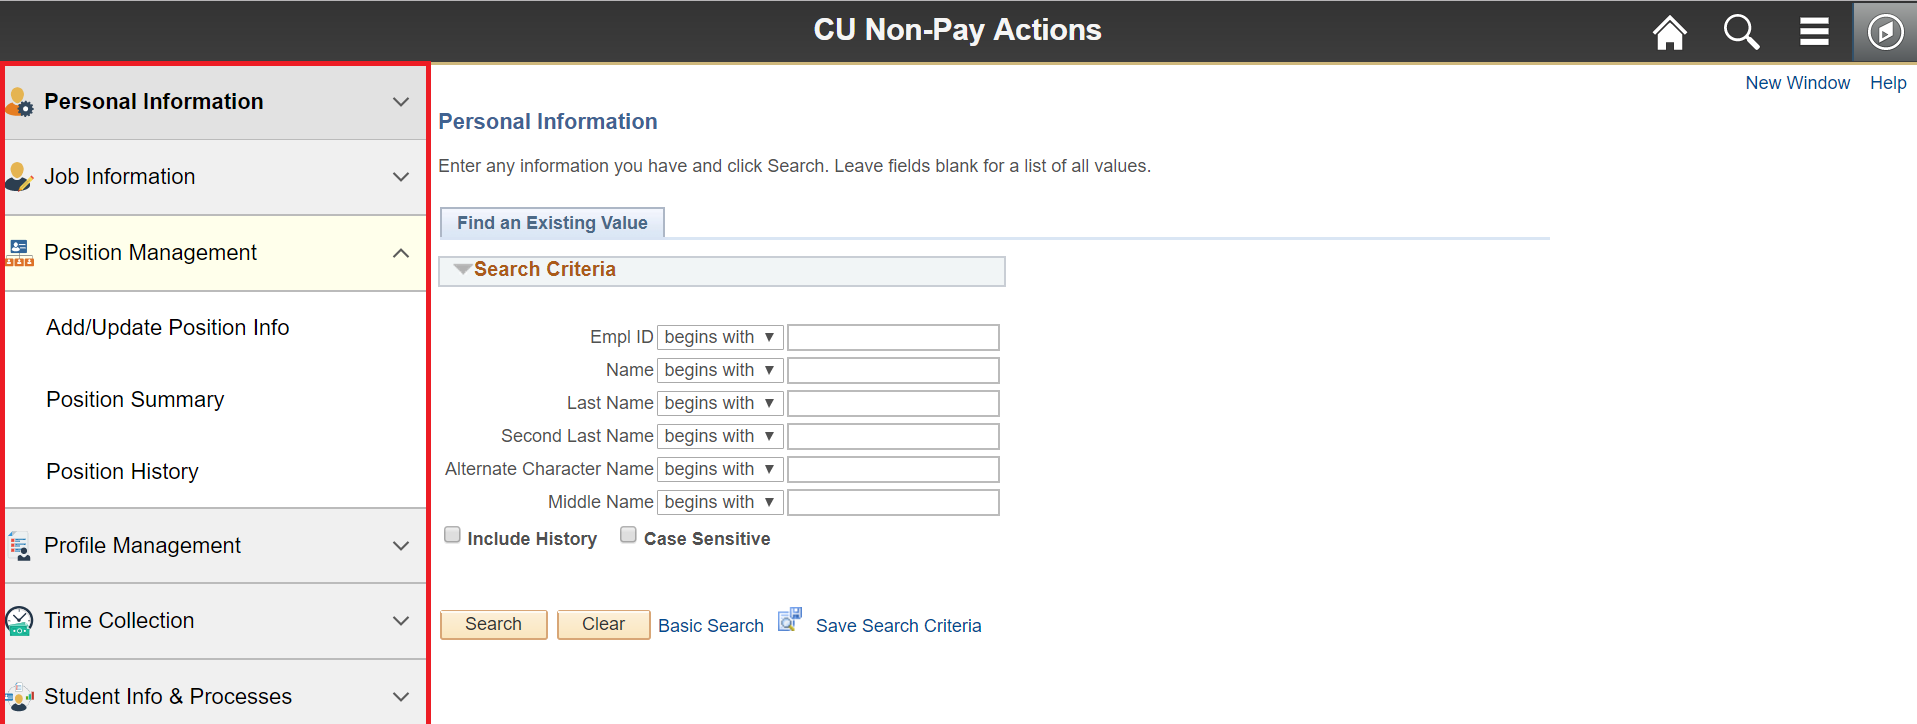 CU Non-Pay Actions